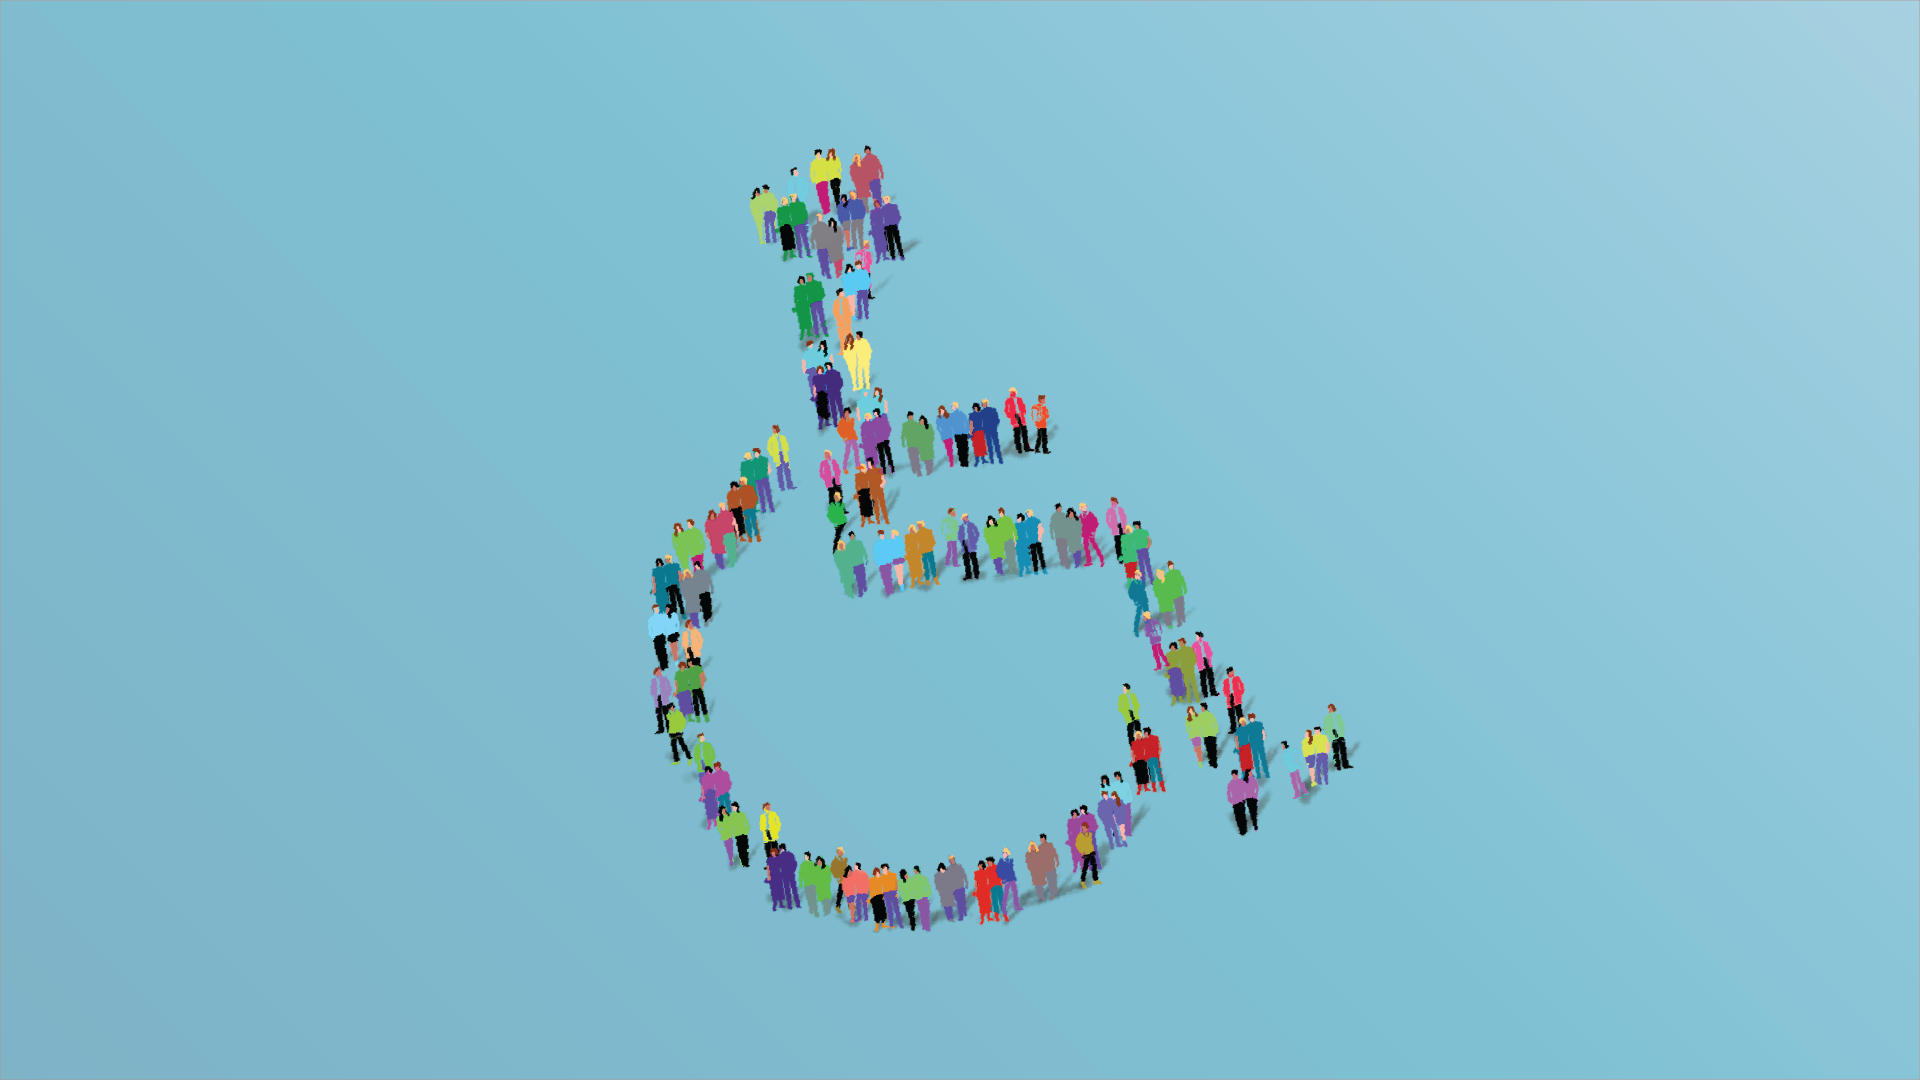 Illustration of the wheelchair disability symbol, made up of many different people.